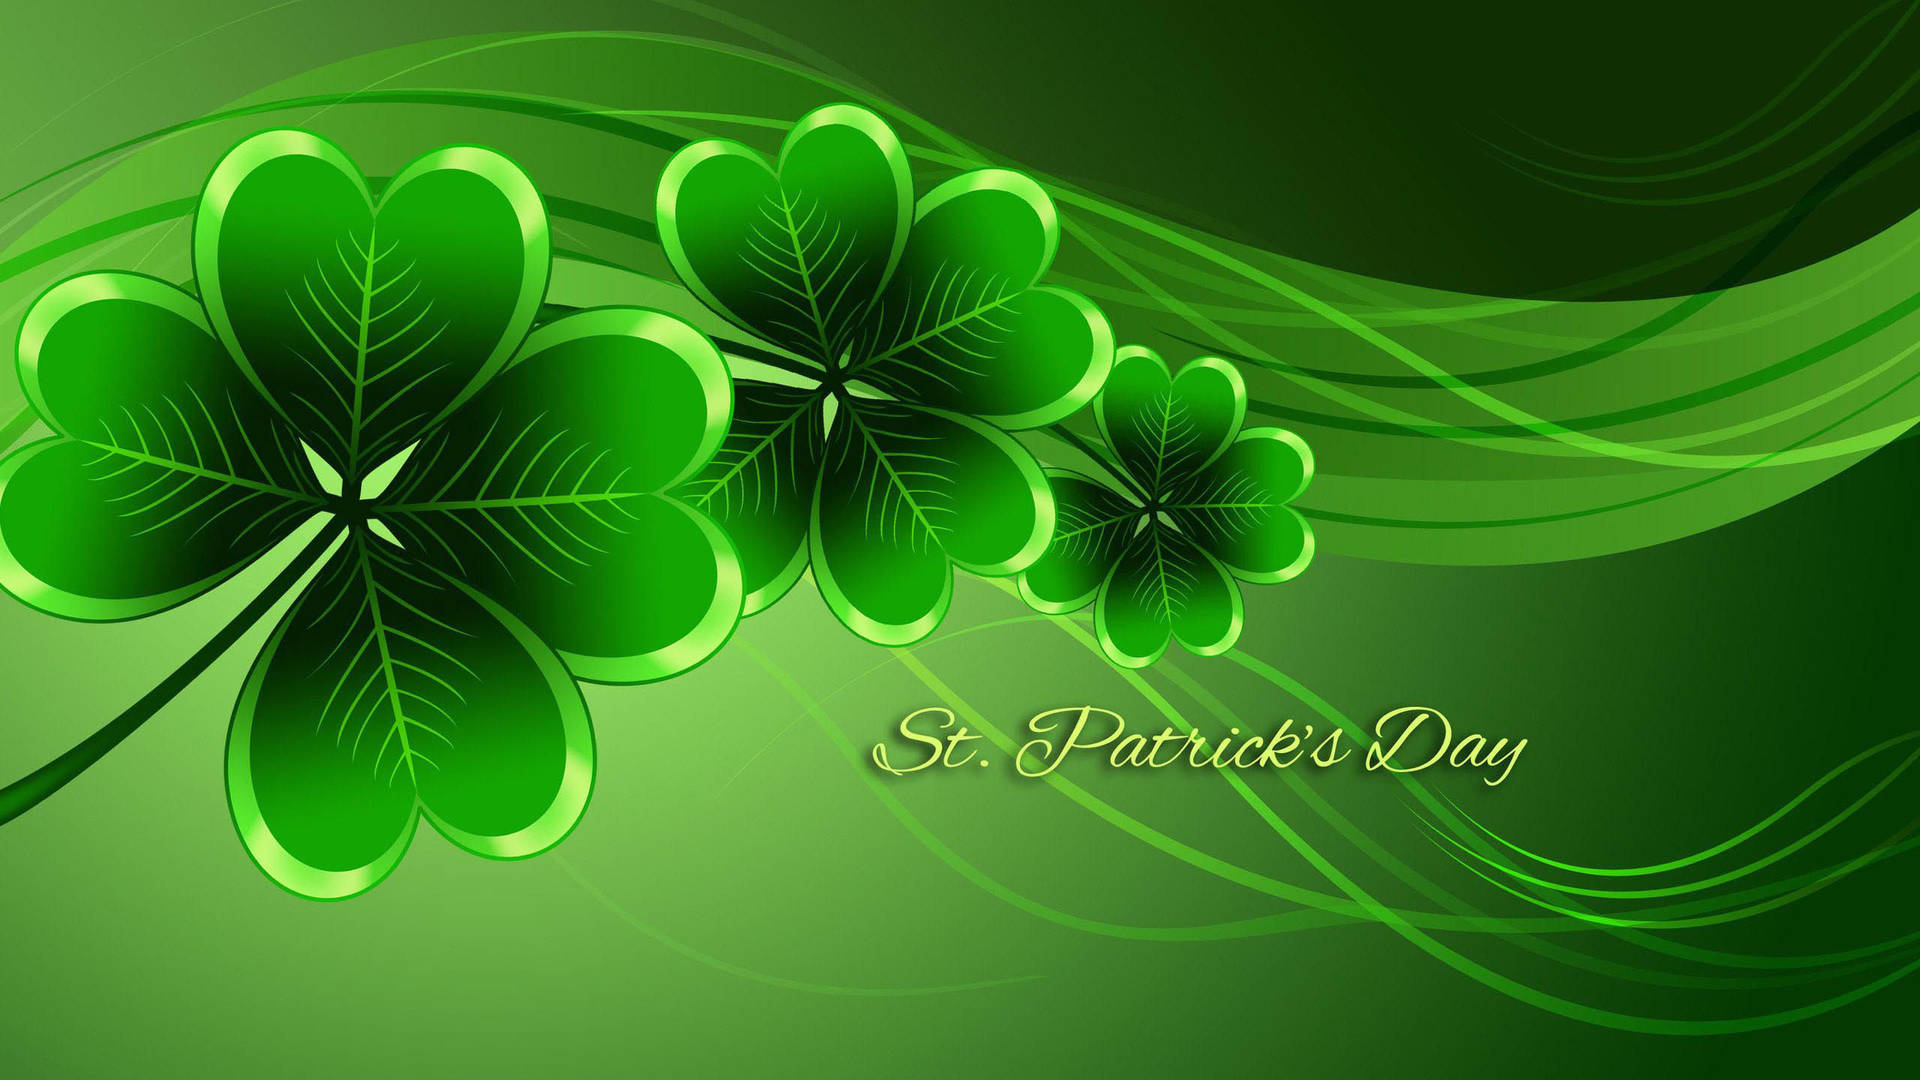 Saint Patrick’s Day With A Clover Wave Background